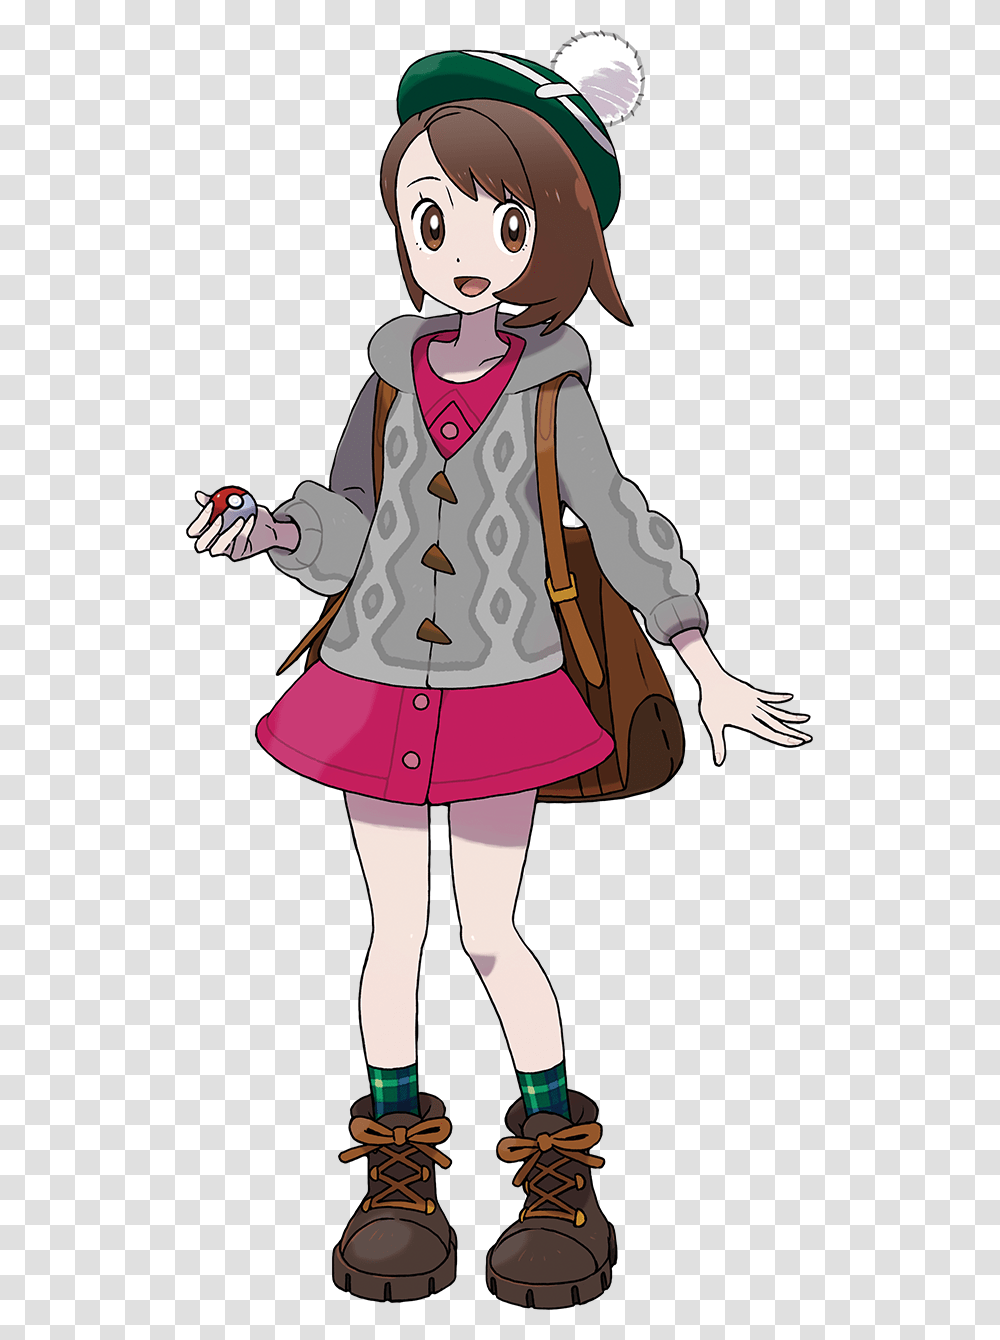 Sword Shield Female Trainer Pokemon Sword And Shield Characters, Person, Shoe, Coat Transparent Png